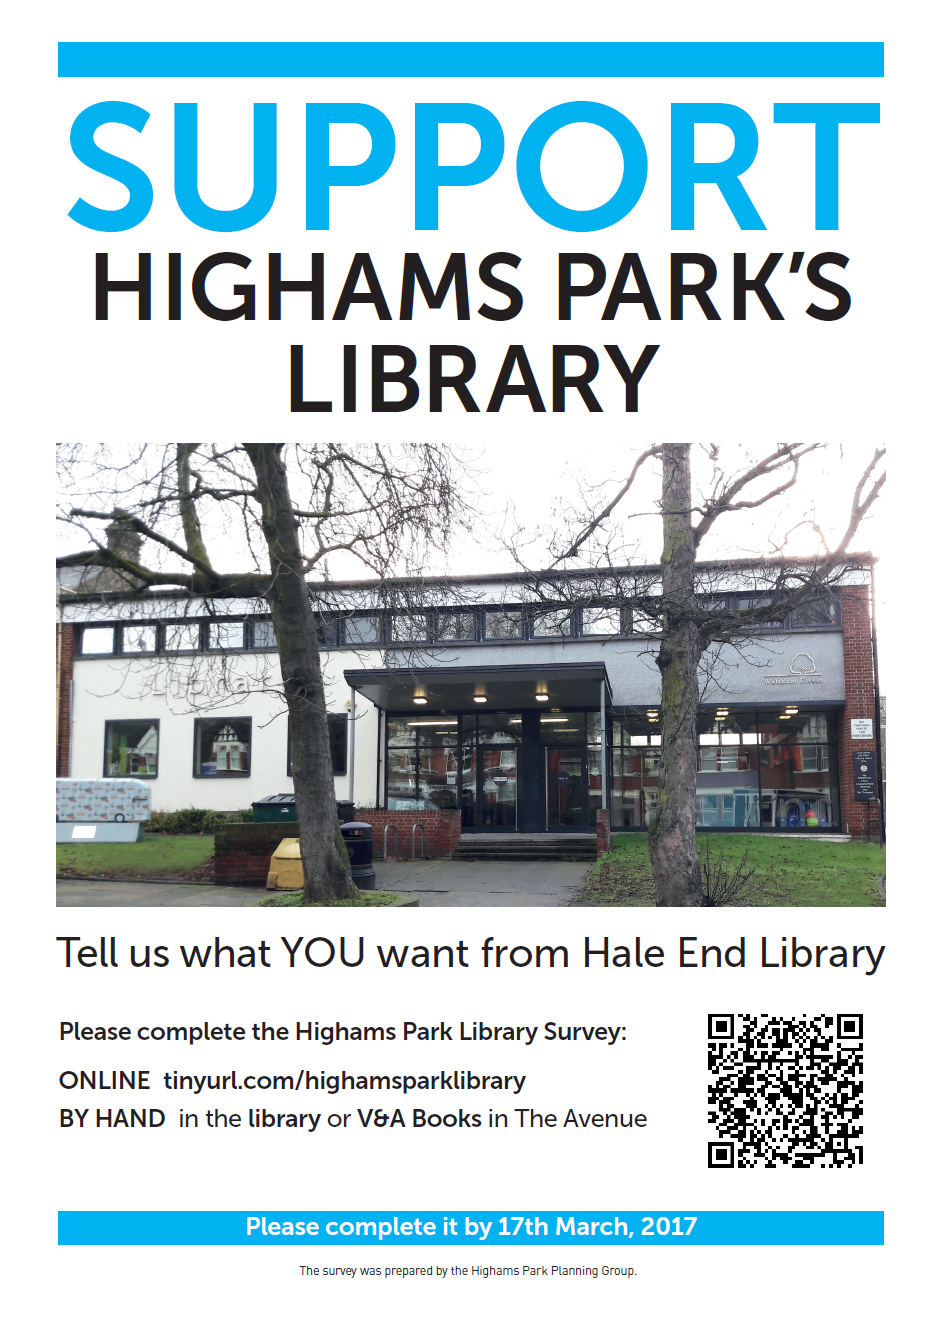 HPPG Survey on Hale End Library is now closed